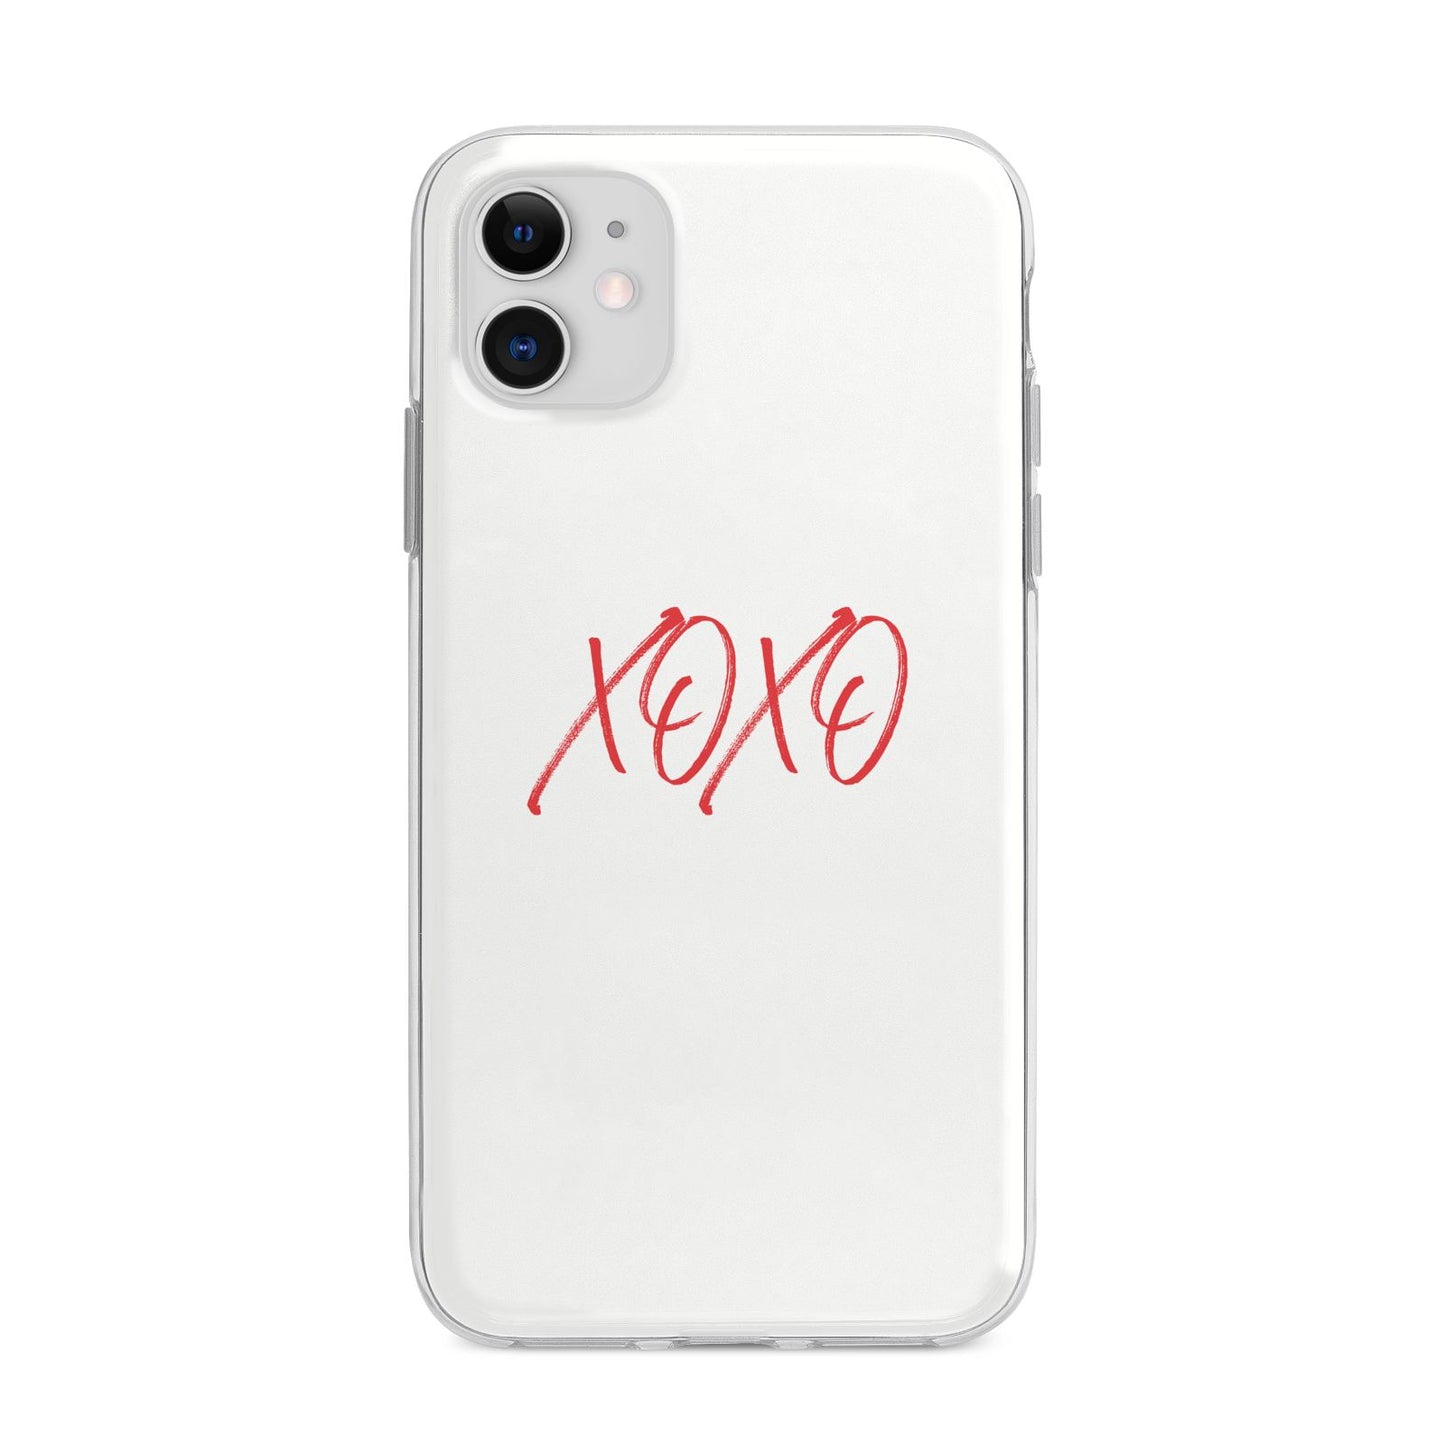 I love you like xo Apple iPhone 11 in White with Bumper Case